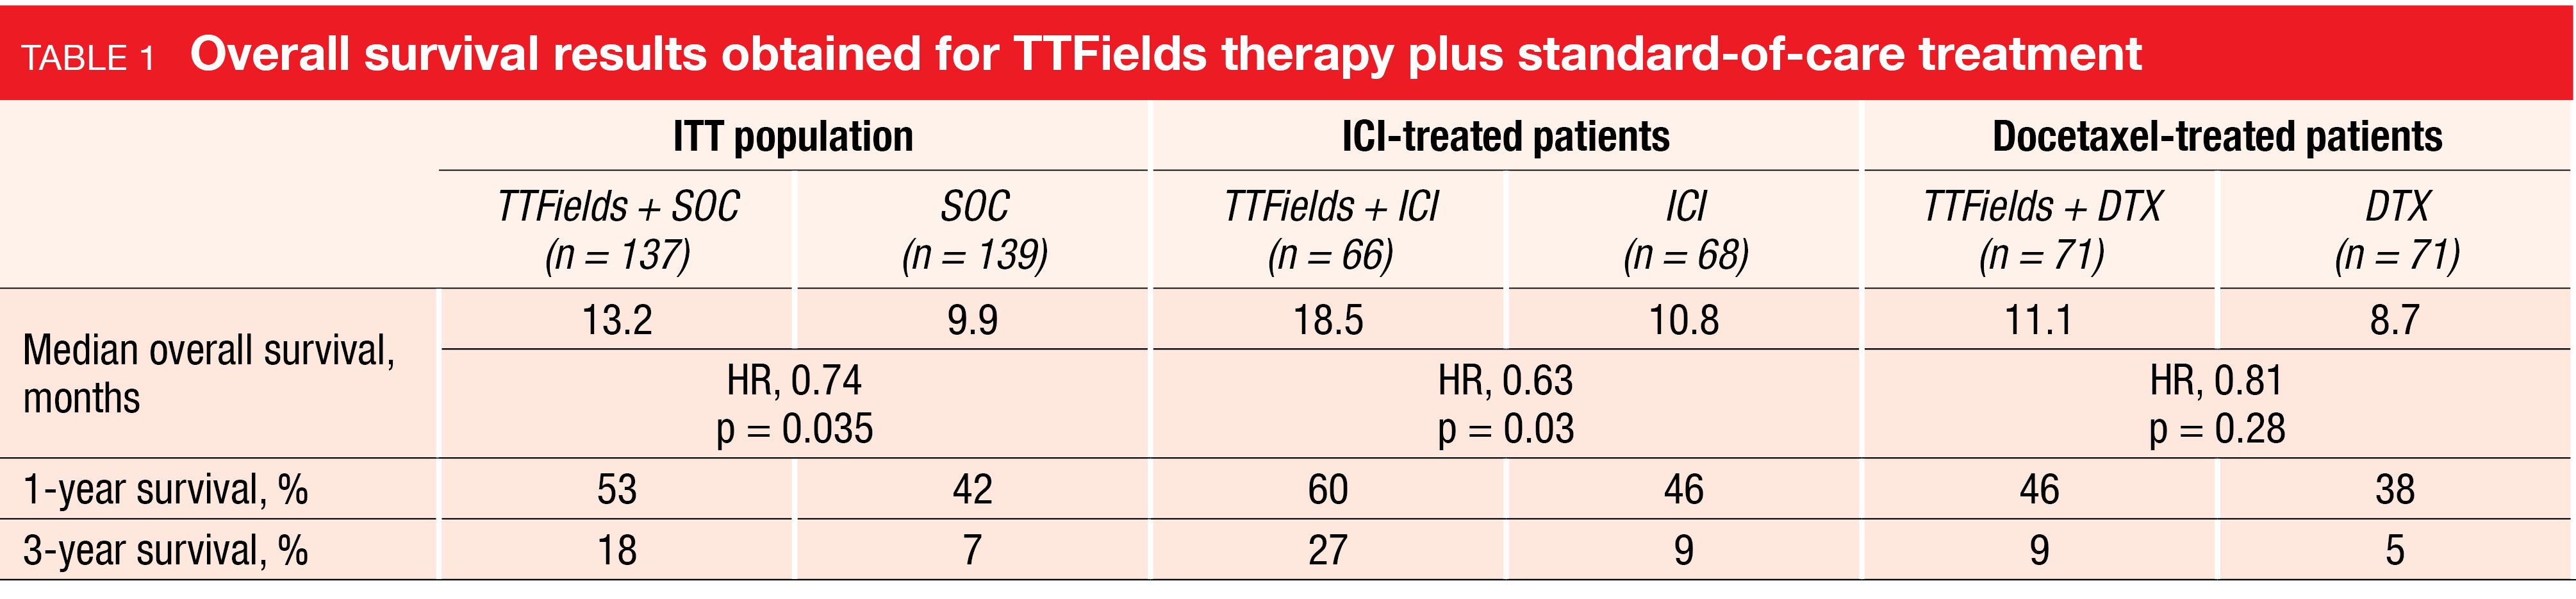 Table 1 Overall survival results obtained for TTFields therapy plus standard-of-care treatment